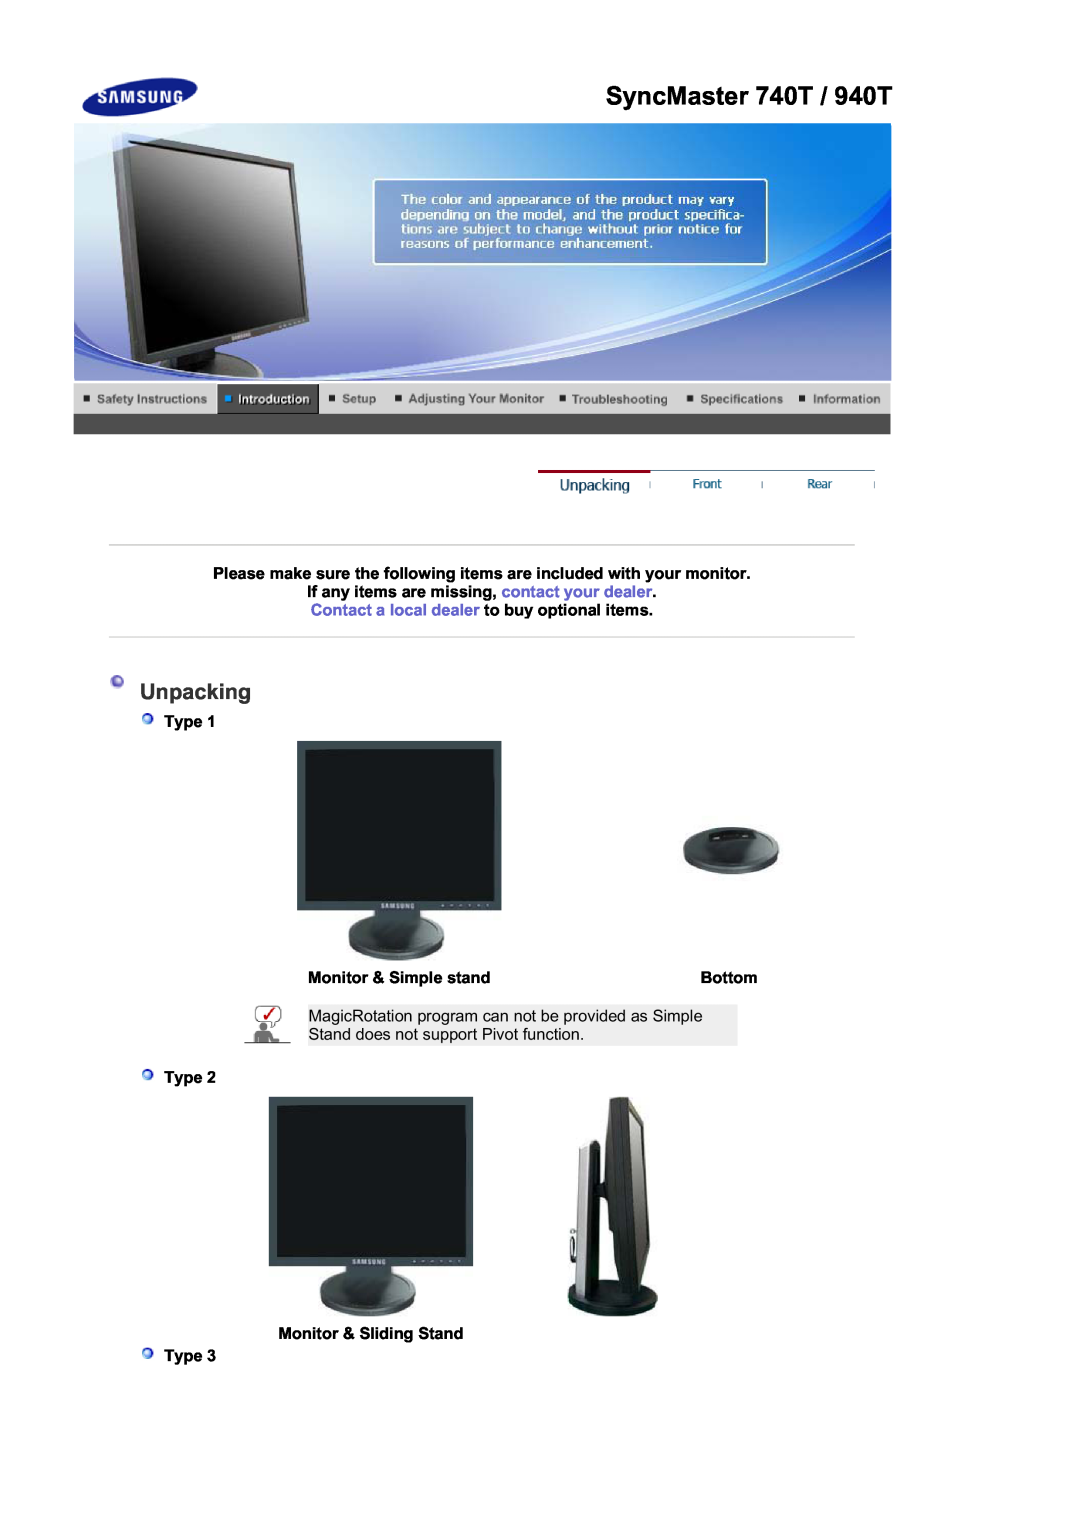 Samsung 740N, 940B SyncMaster 740T / 940T, Type Monitor & Sliding Stand Type, Unpacking, Monitor & Simple stand, Bottom 